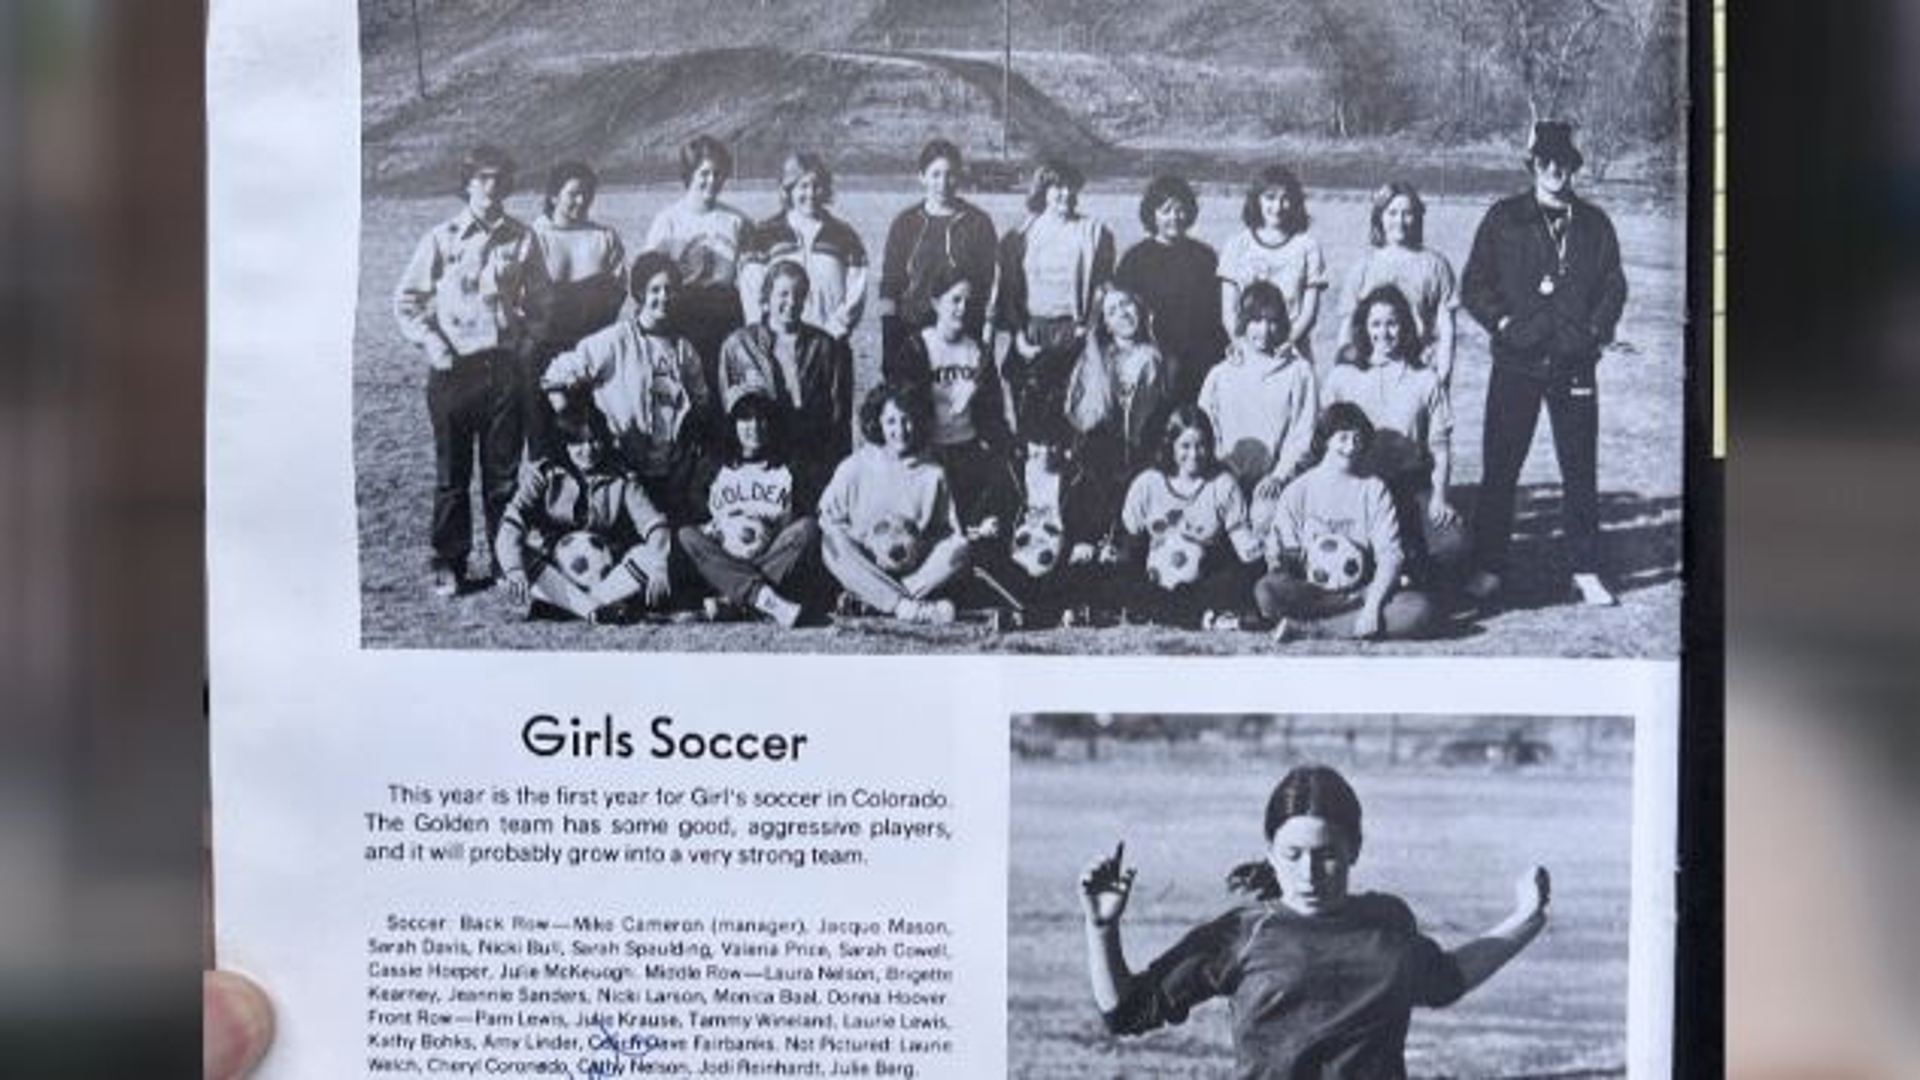 Donna Hoover sued the state of Colorado for girls' equal access to soccer in the mid 1970s. She now watches the success of Horan, Swanson, and Smith on the USWNT.